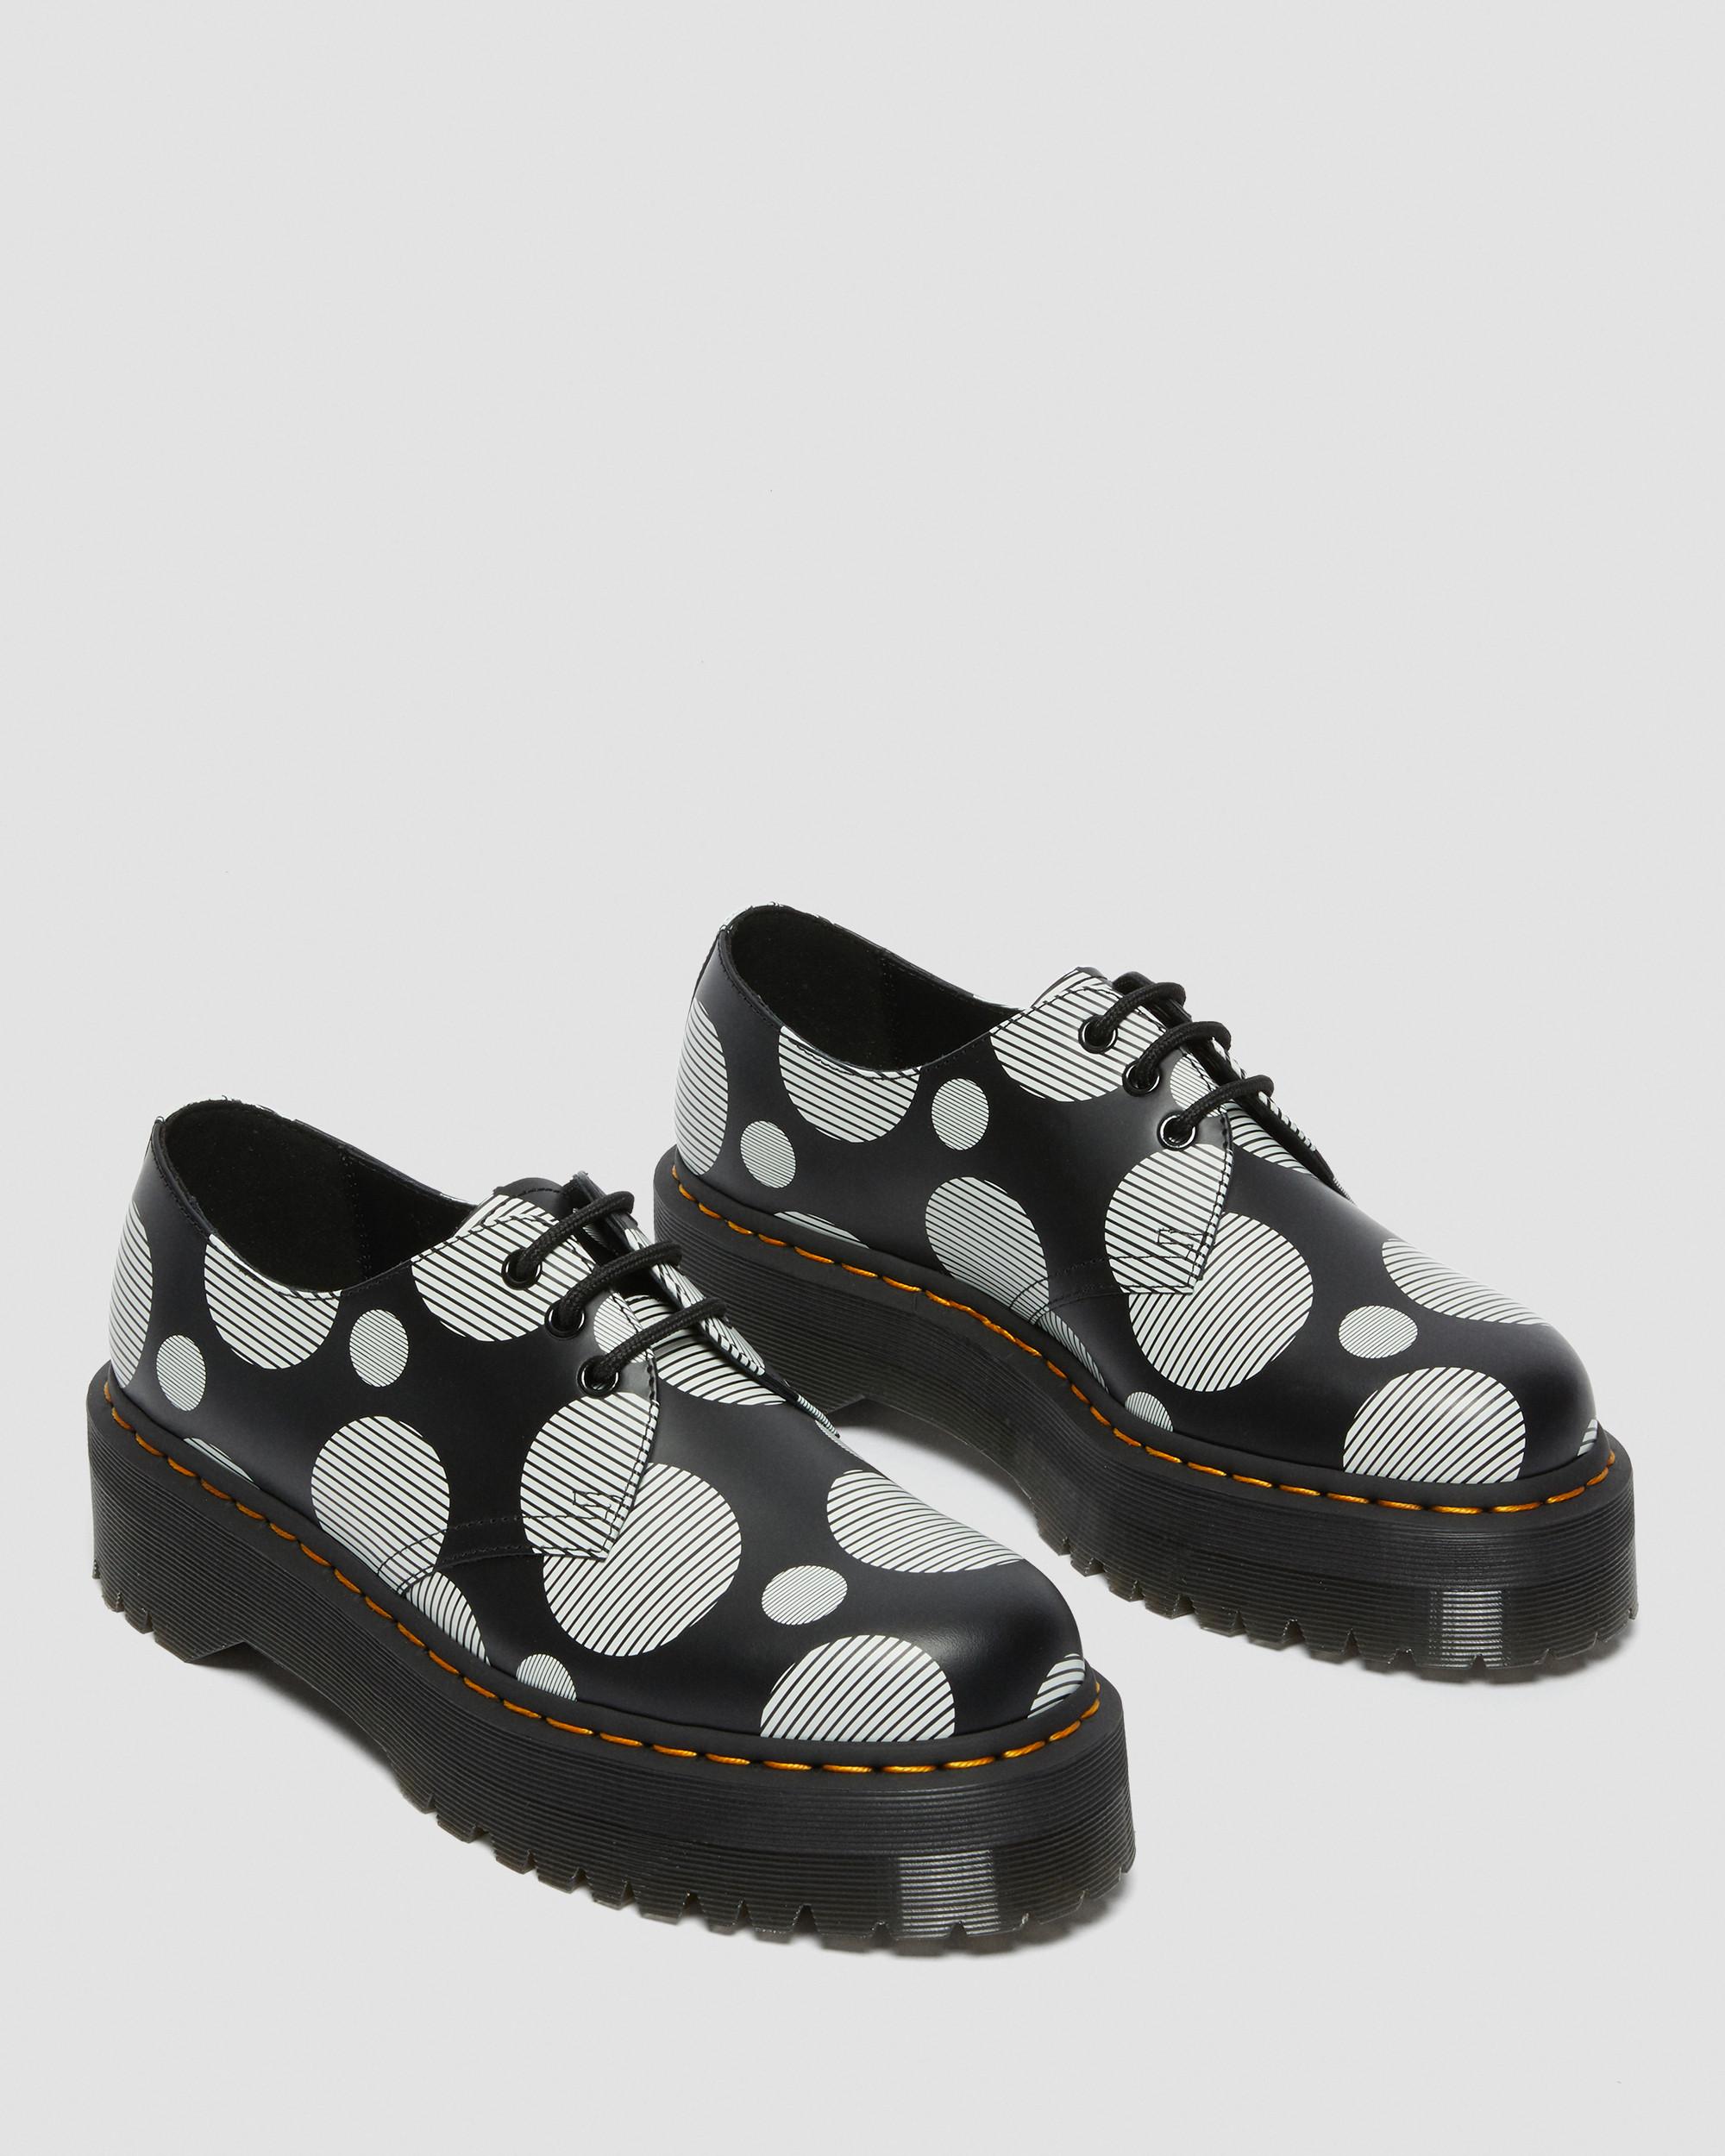 Limited Free Shipping Area Dr Martens 1461 Polka Dot